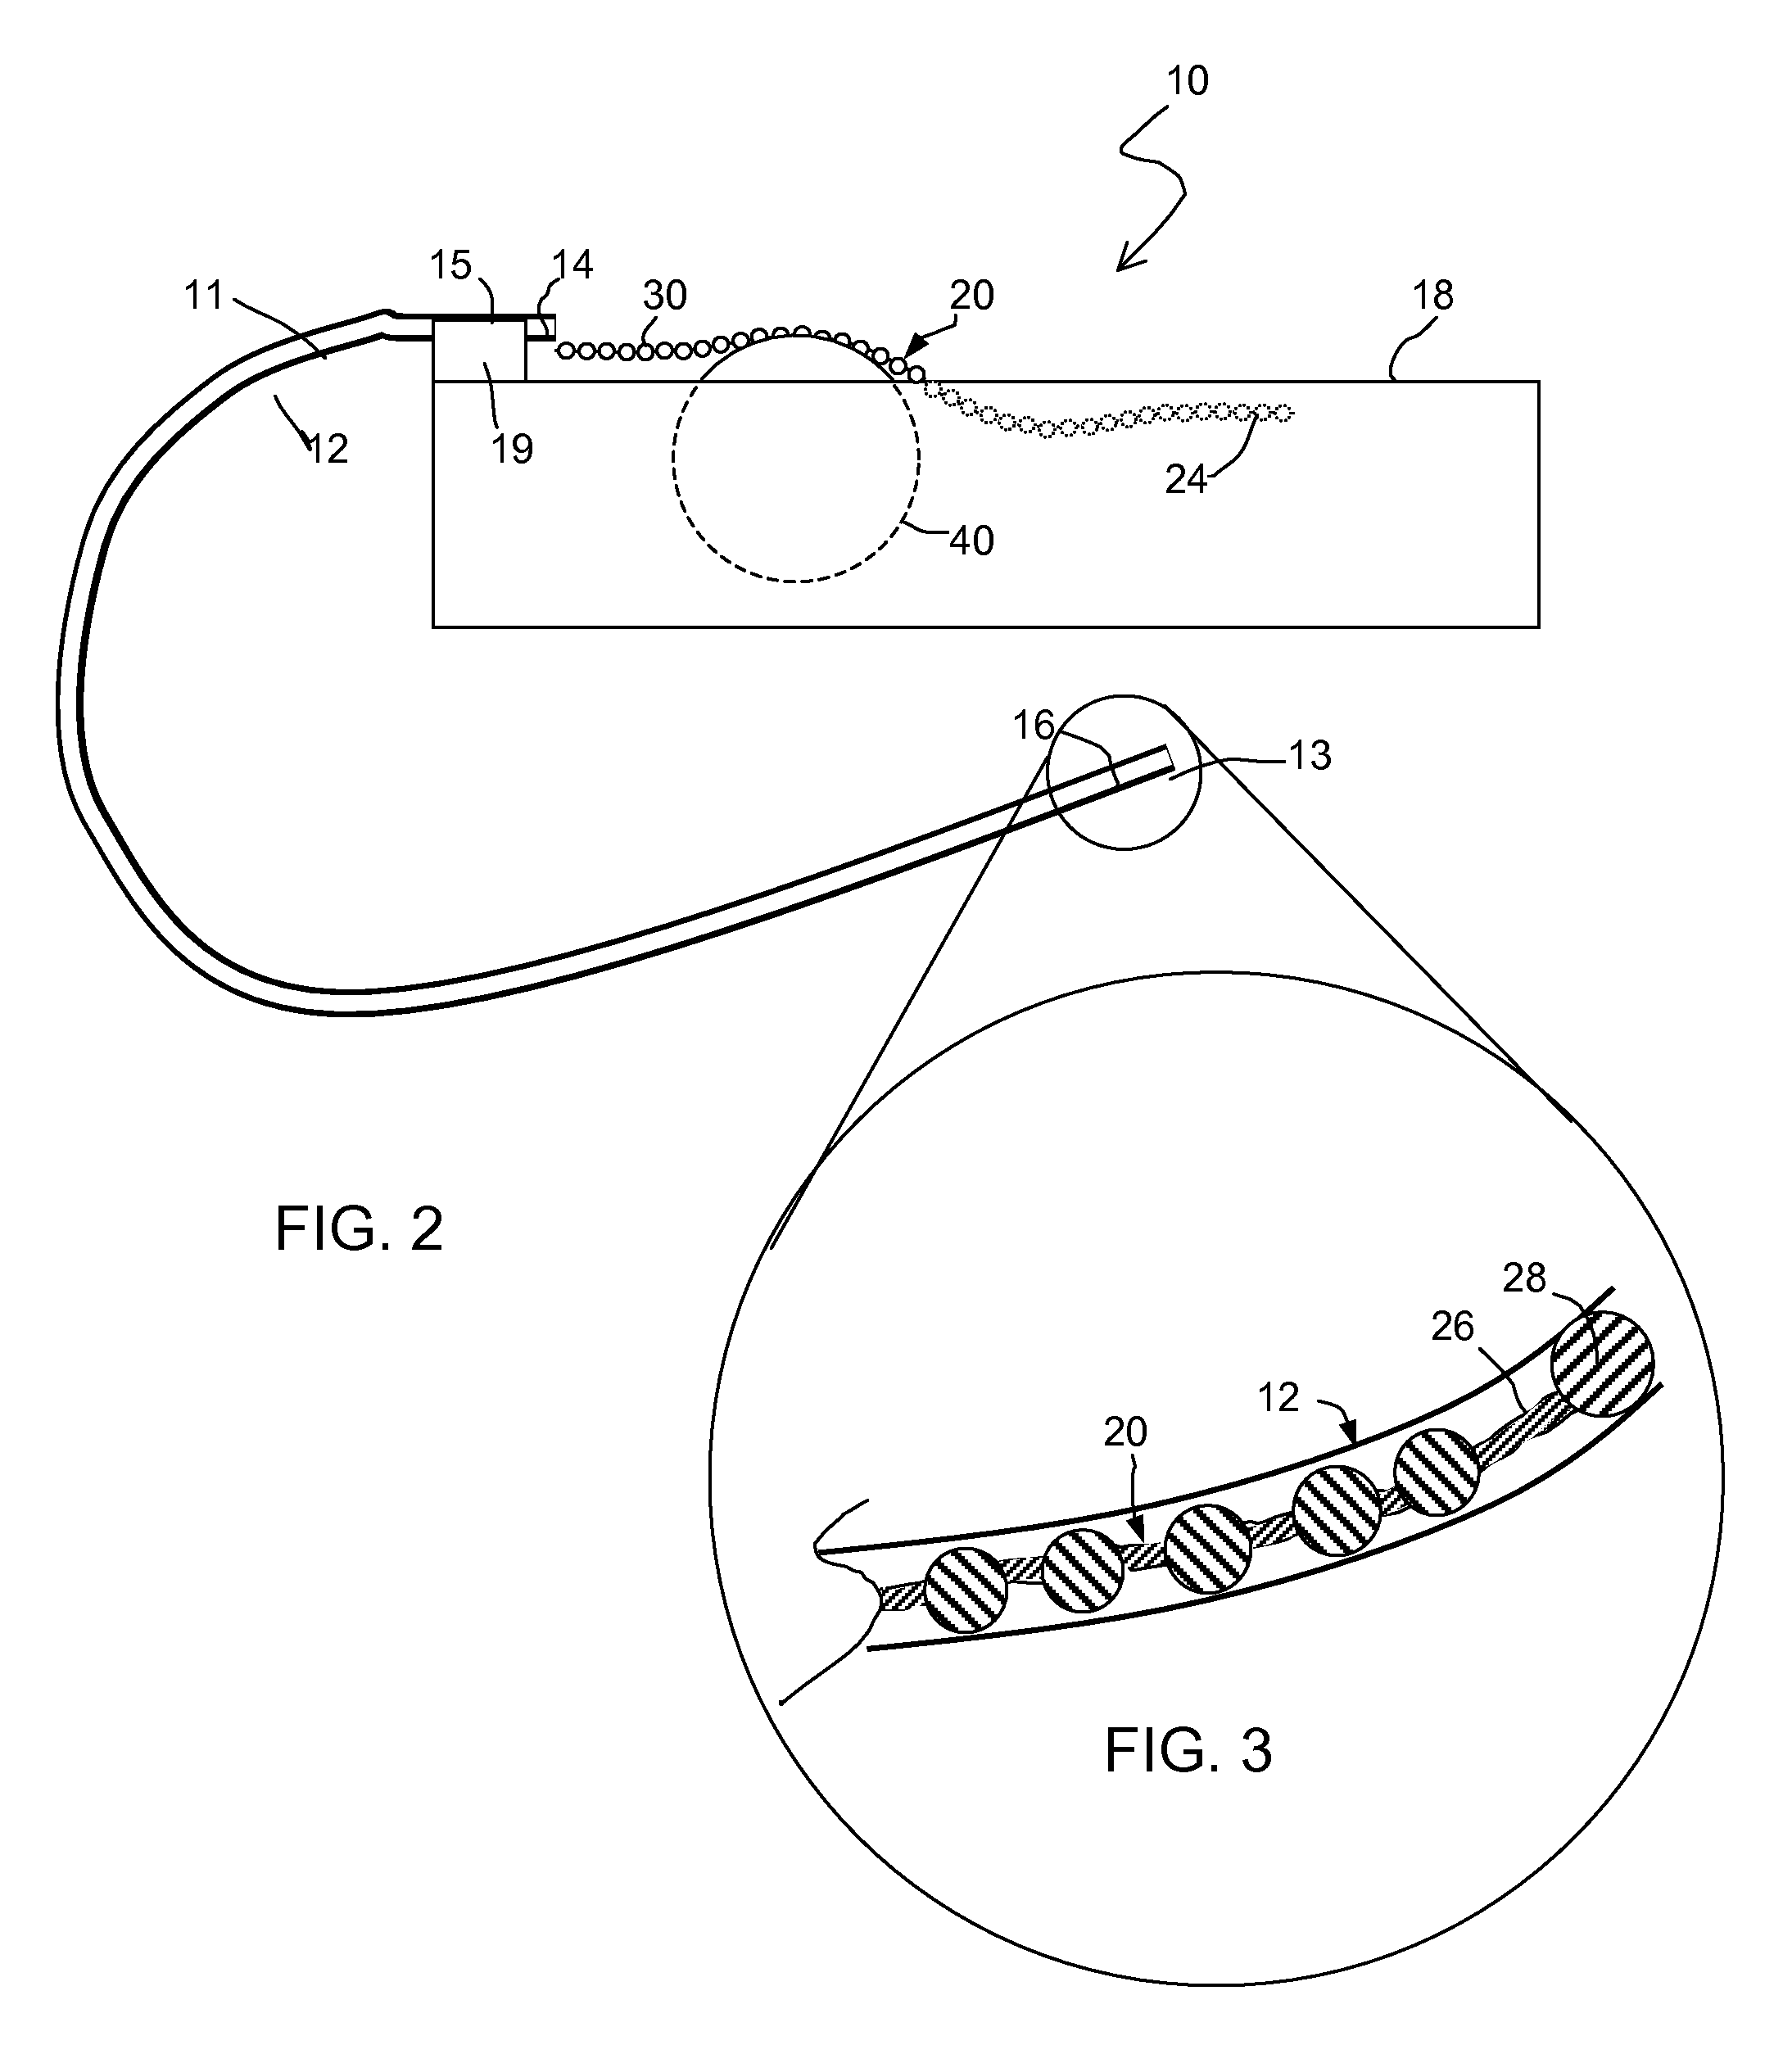 Oil sampling device having a flexible piston and chamber